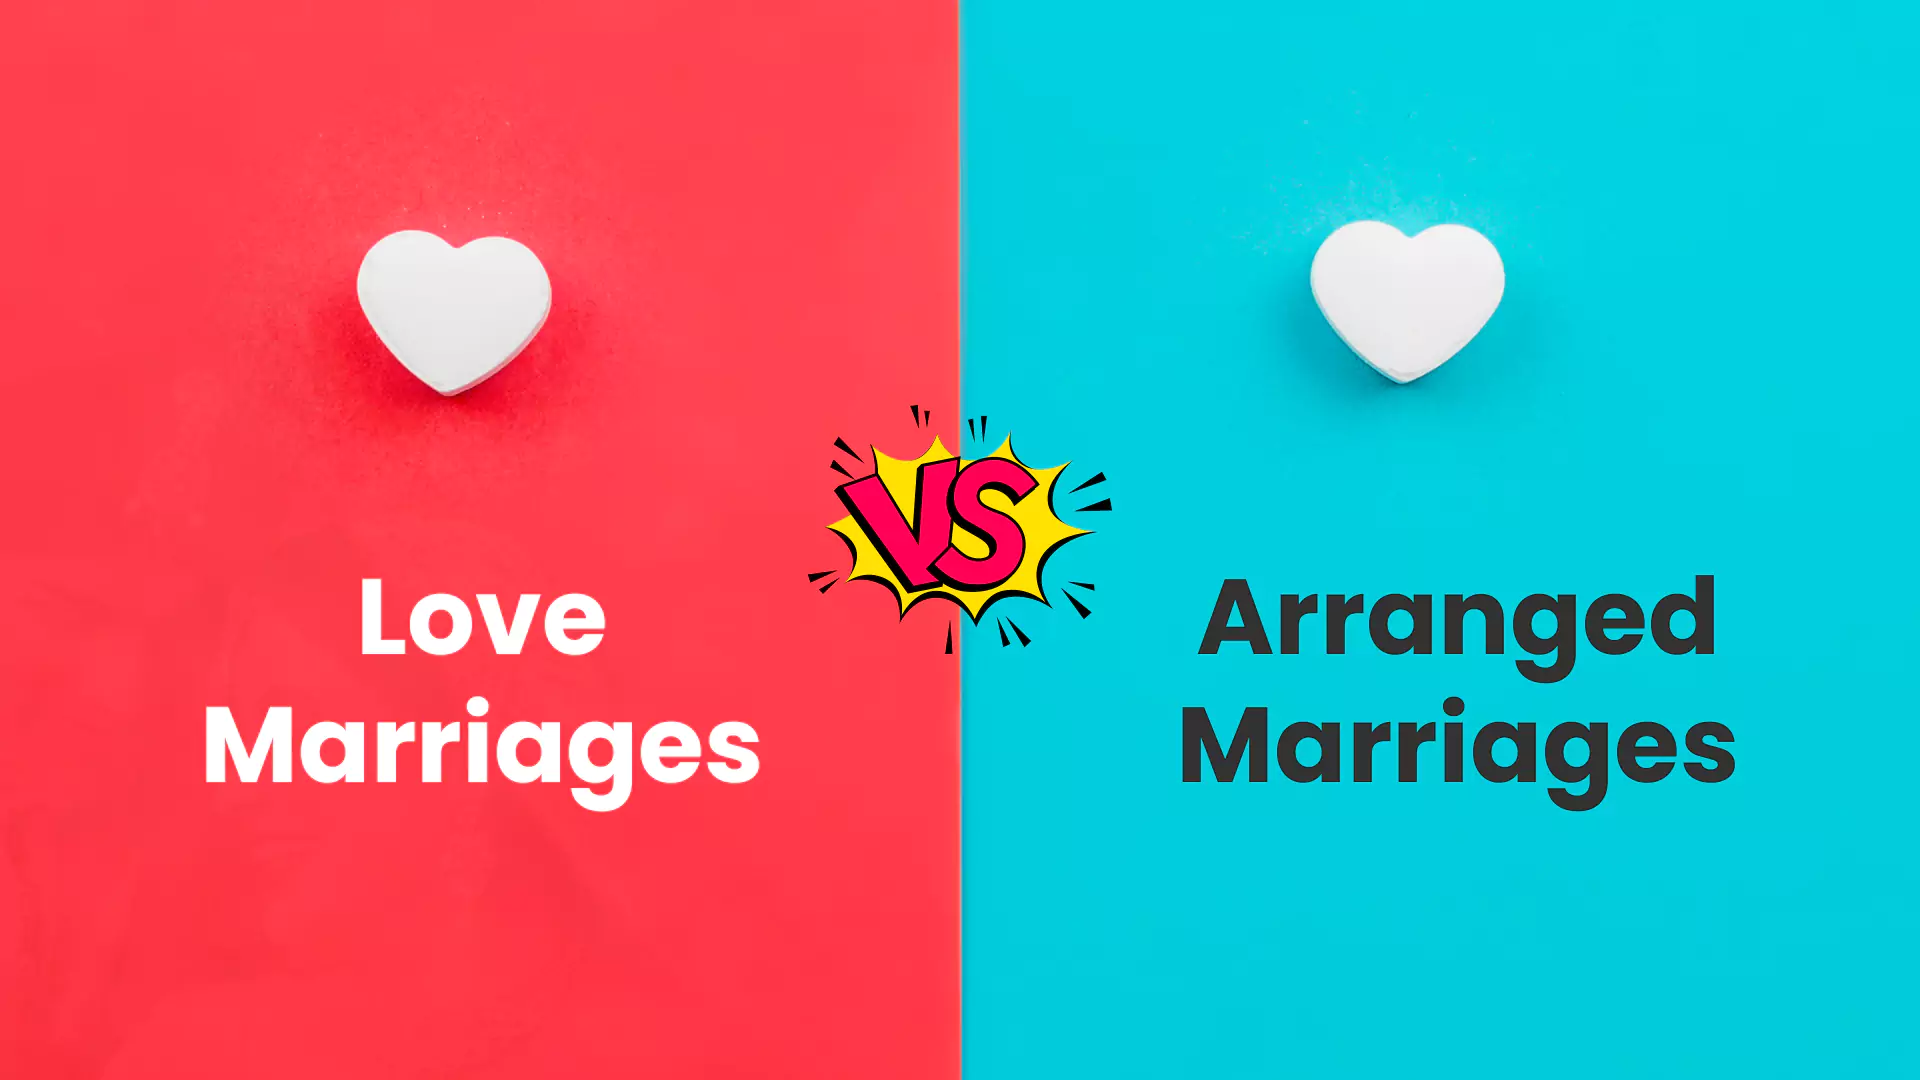 Love marriages Vs Arranged marriages